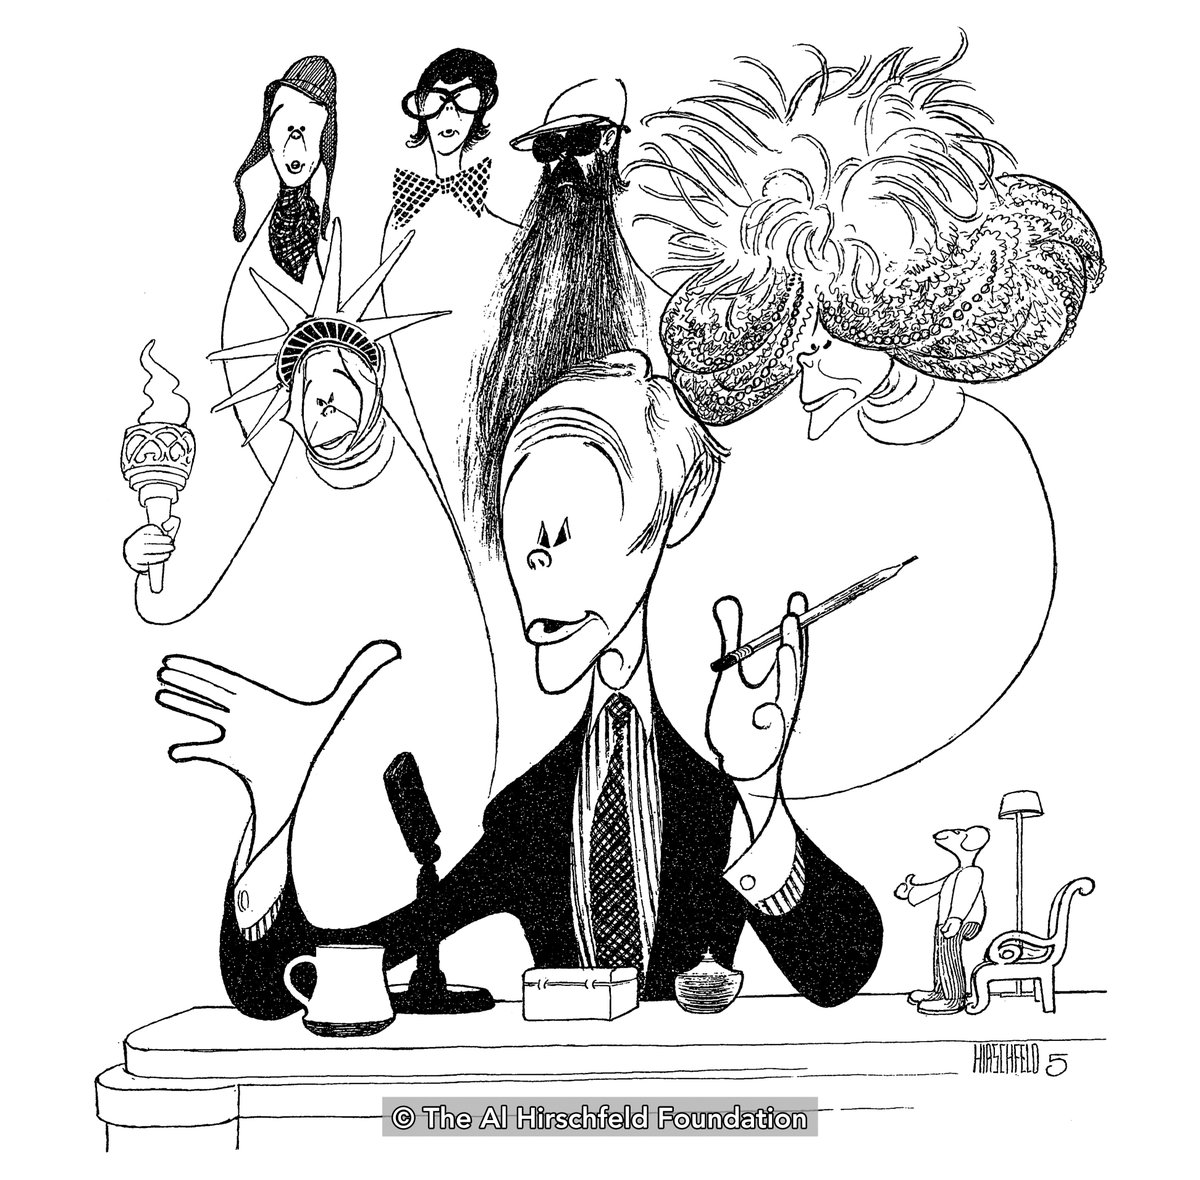 #OTD Johnny Carson Retires with the Characters He Created On The Tonight Show, 1992 What are your favorite moments from The Tonight Show Starring Johnny Carson? #JohnnyCarson #Hirschfeld #TheTonightShow #Comedy #LateNight #Art #Drawing #TV